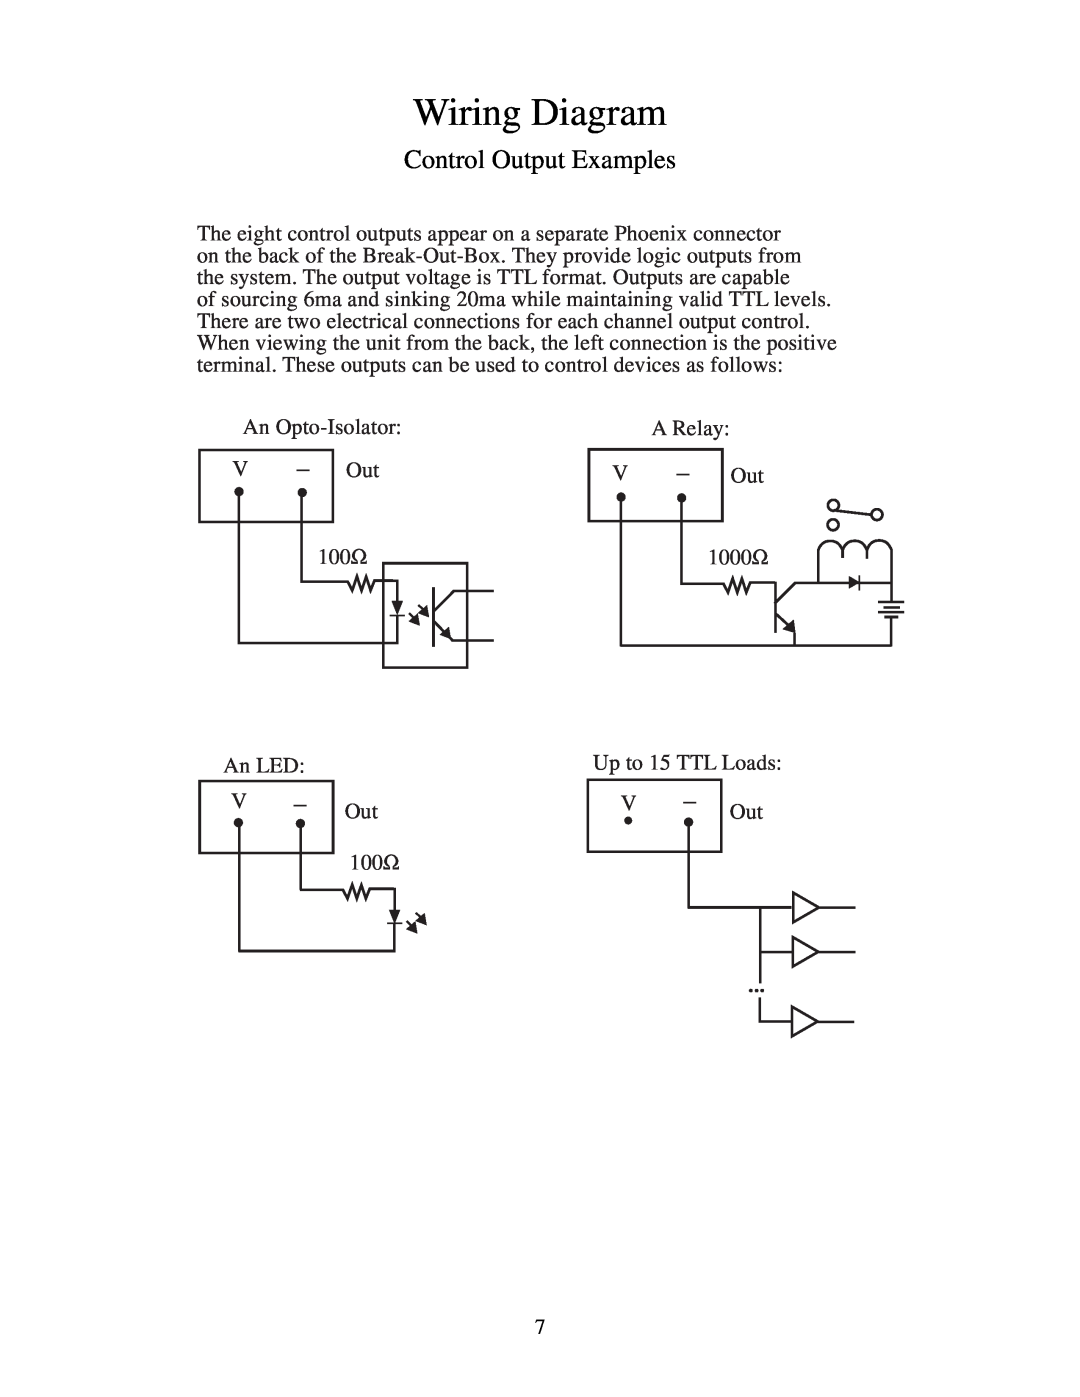 Peavey 646-049 manual Wiring Diagram, Control Output Examples 